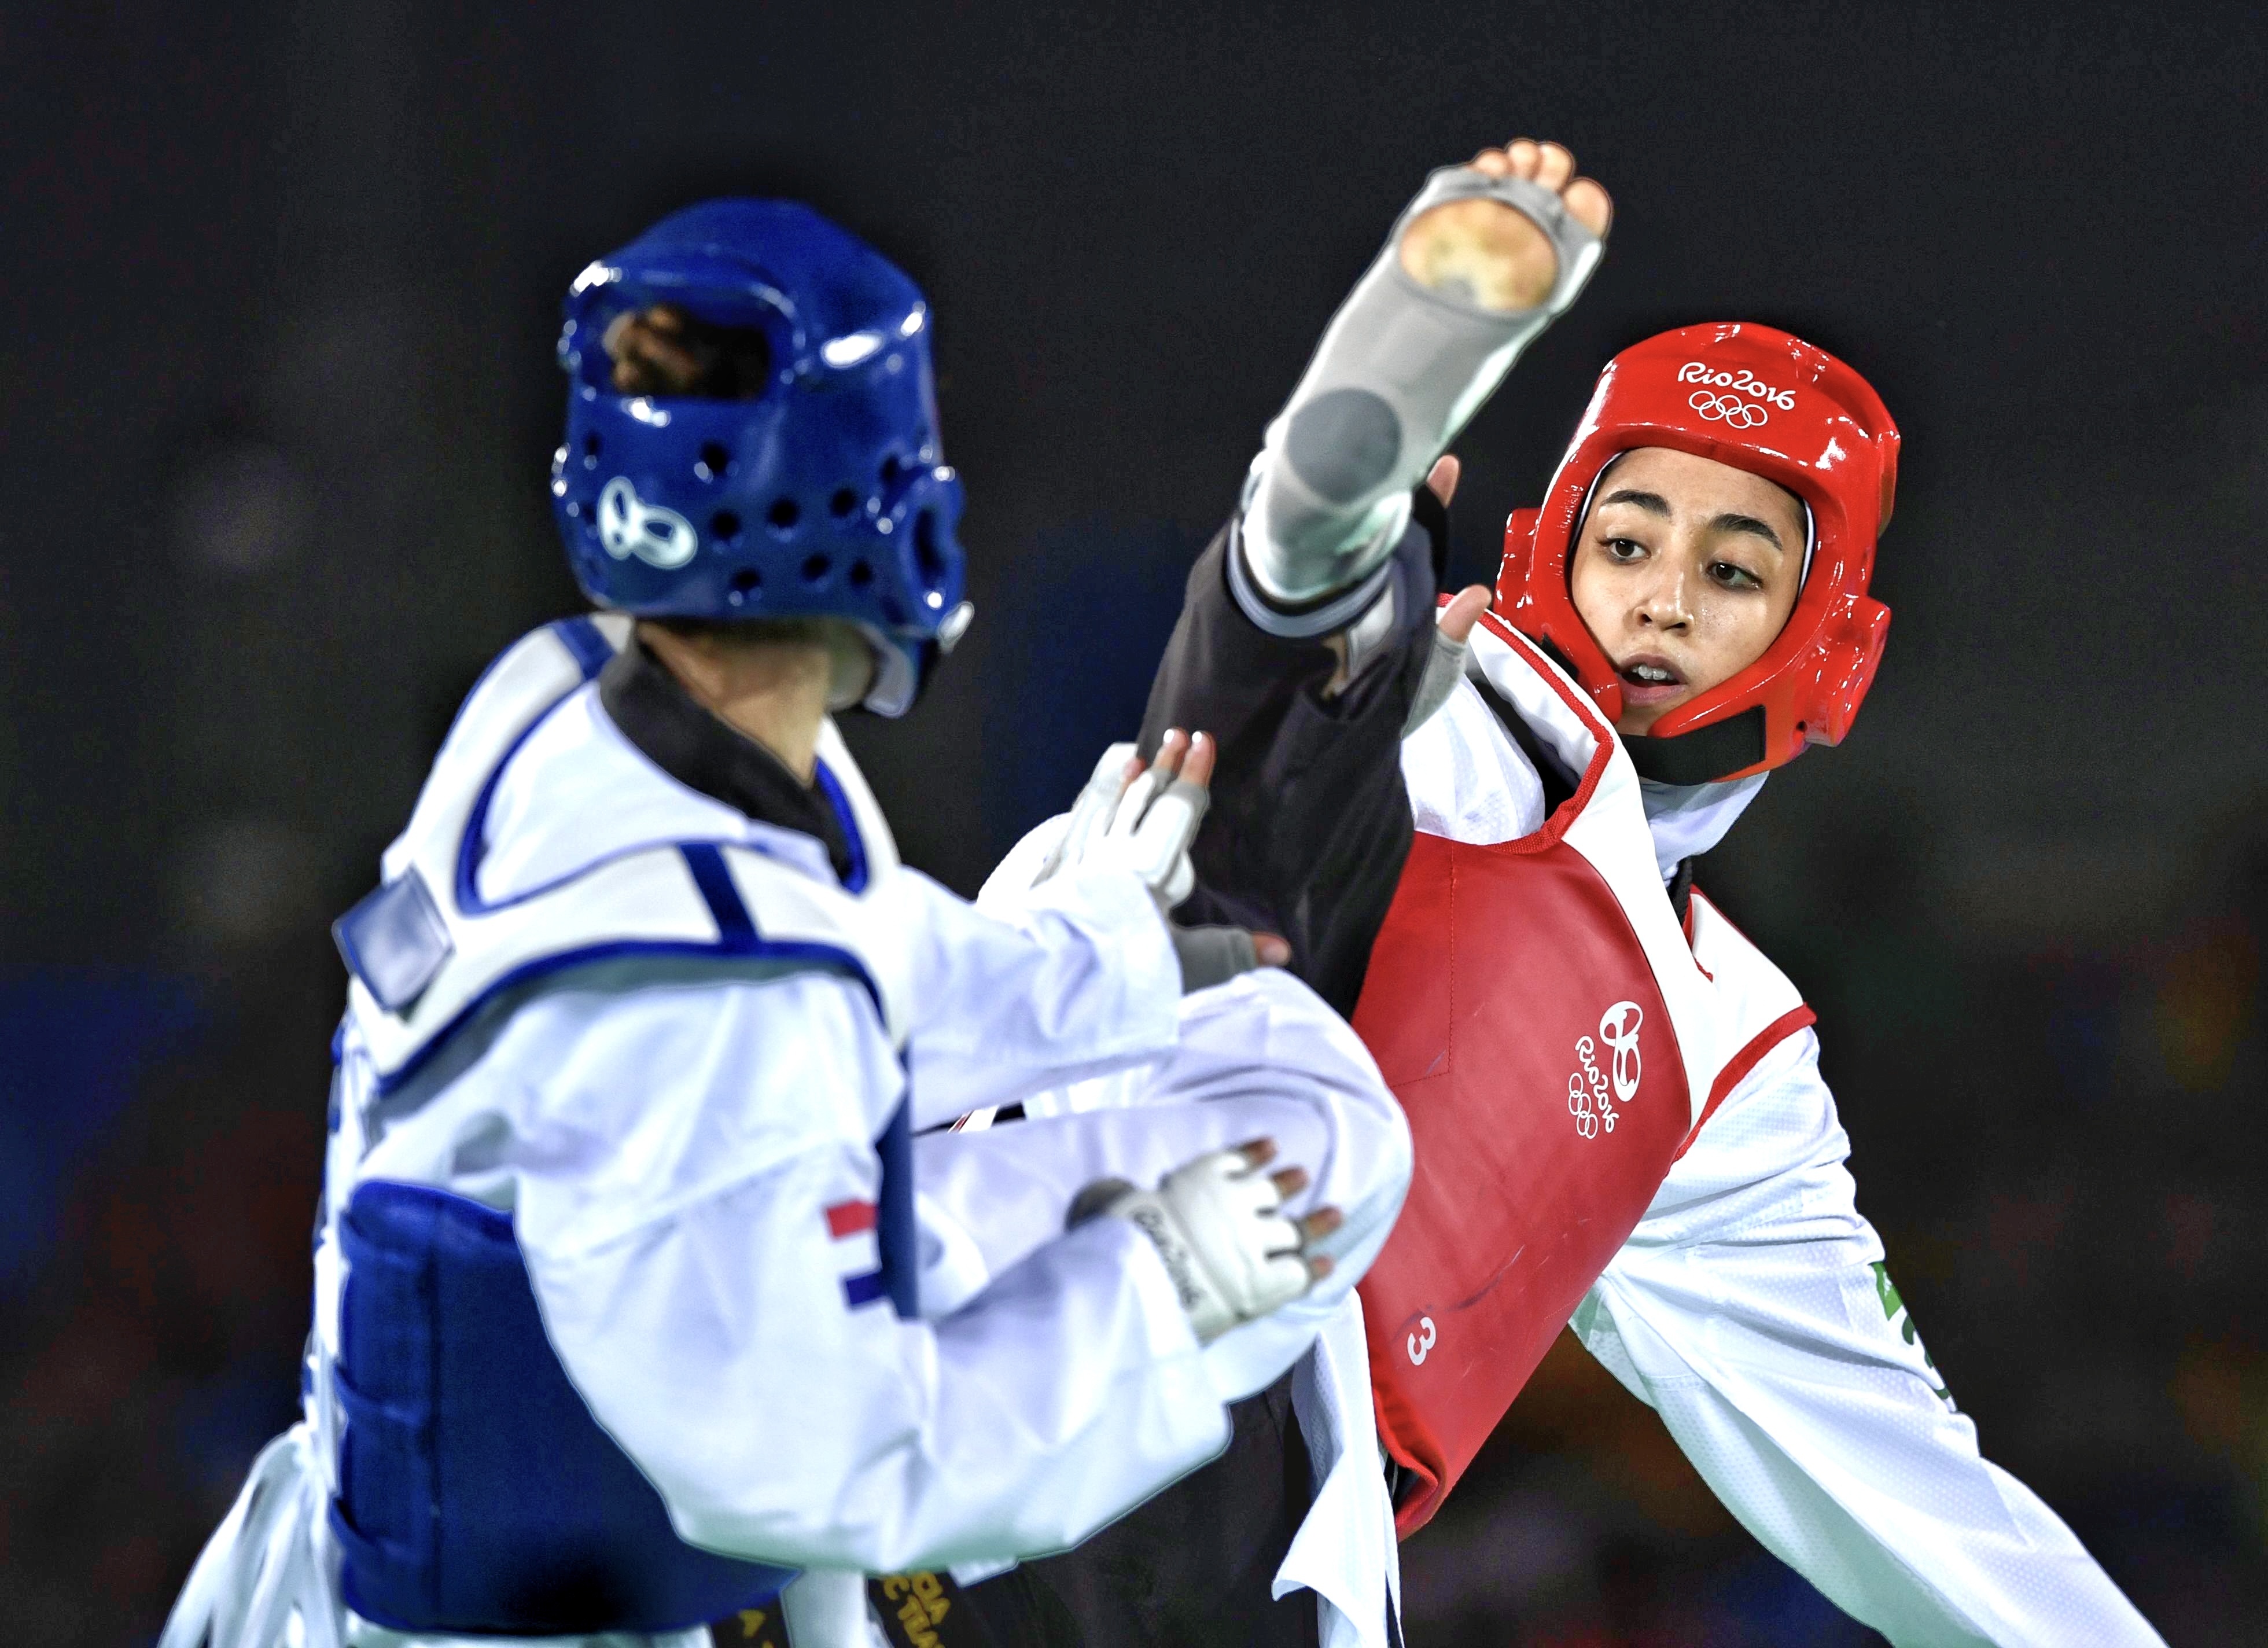 Kimia Alizadeh, Iran's first and only female Olympic medalist, competes in Women's-57kg Bronze Medal Taekwondo contest at 2016 Rio Olympic Games. 